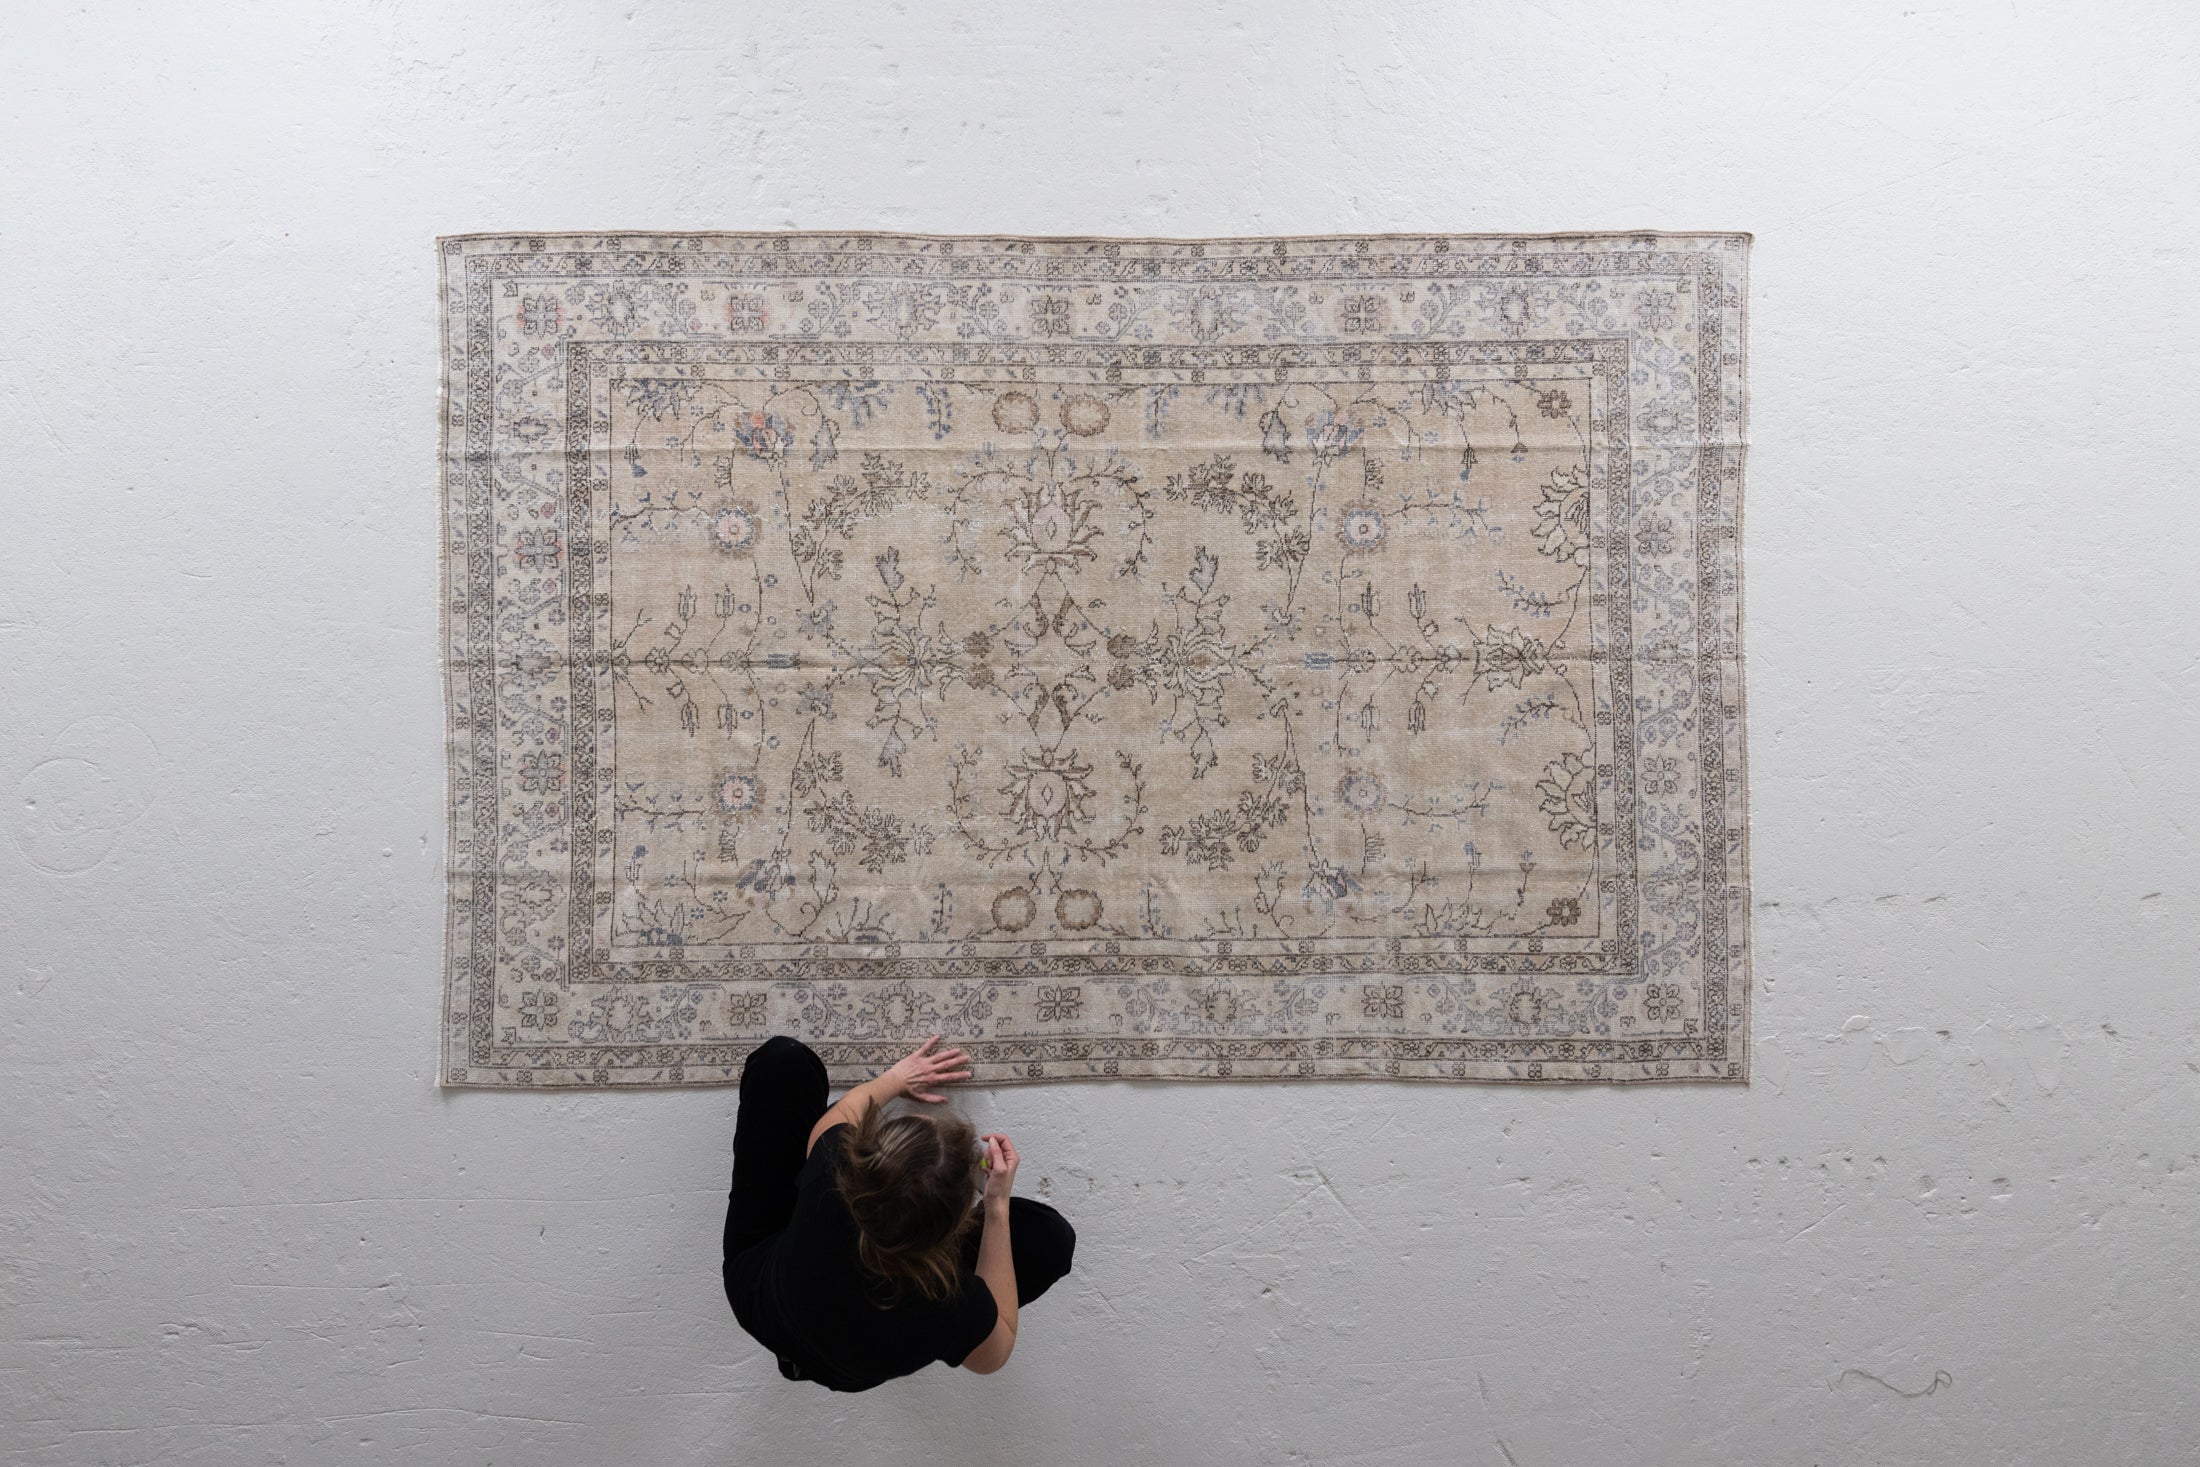 Large Area Rugs